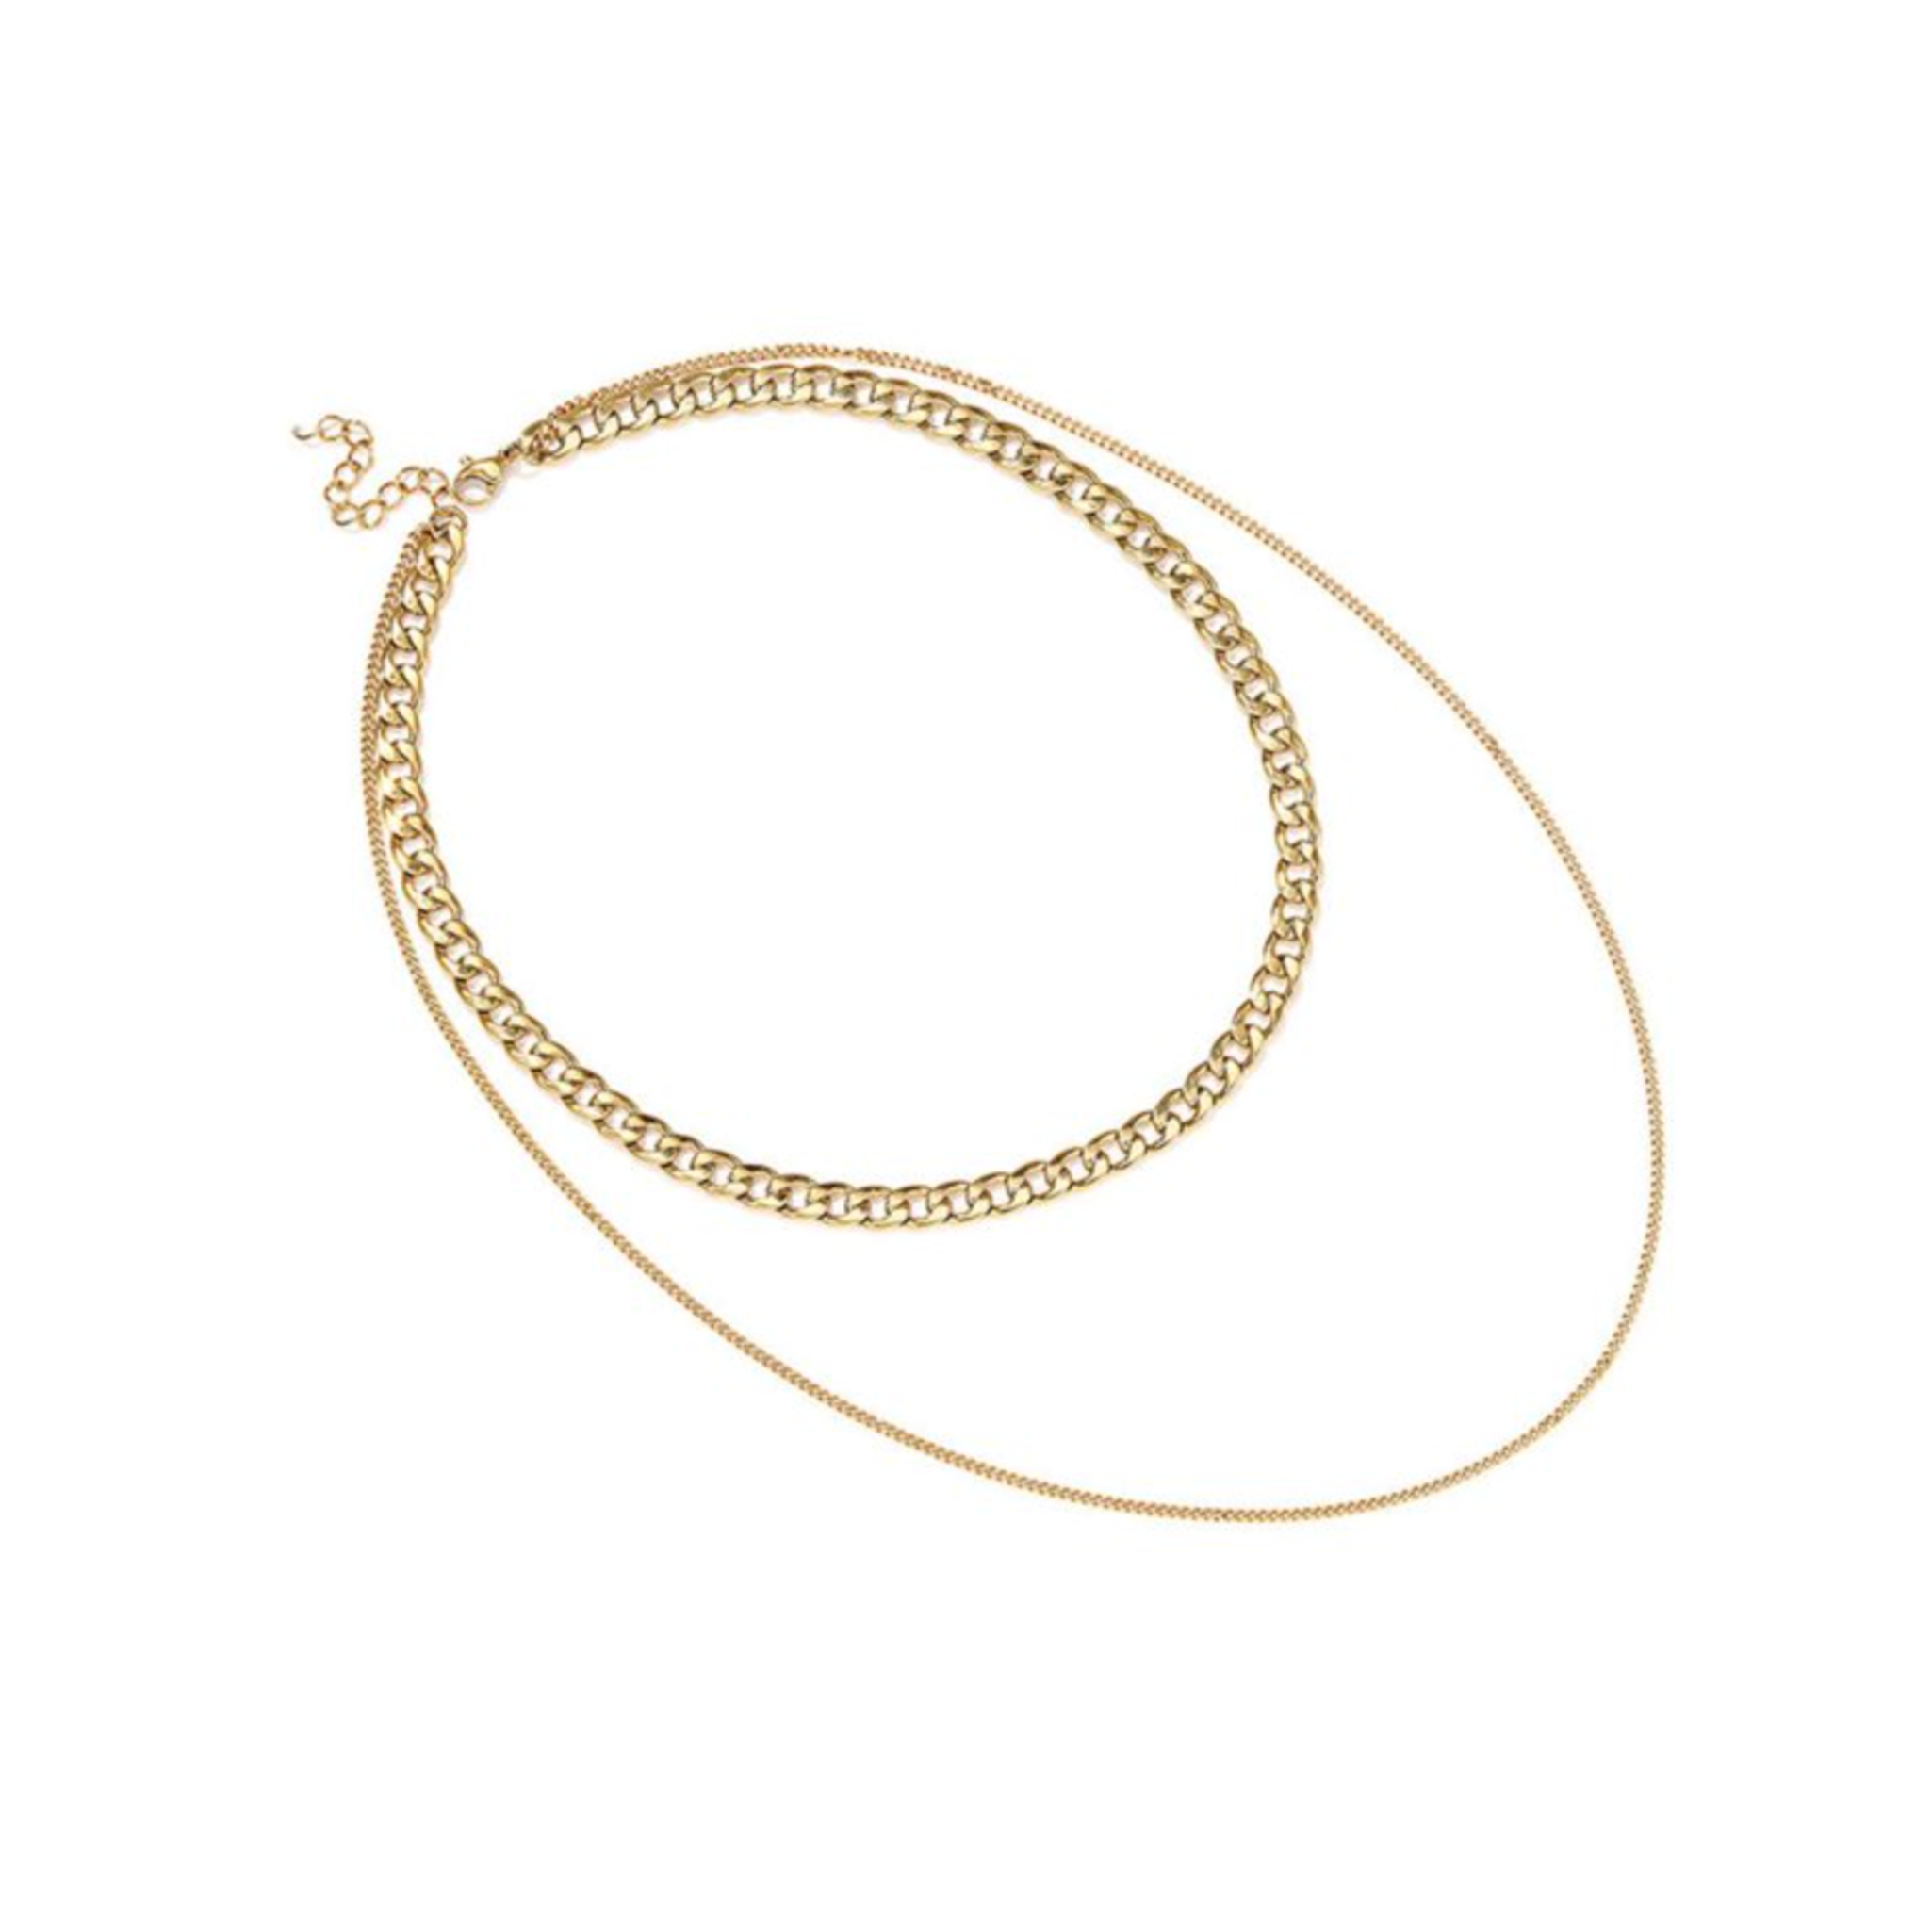 14K Gold Plated Chain Jewelry Chain Necklace Chain Choker Chain